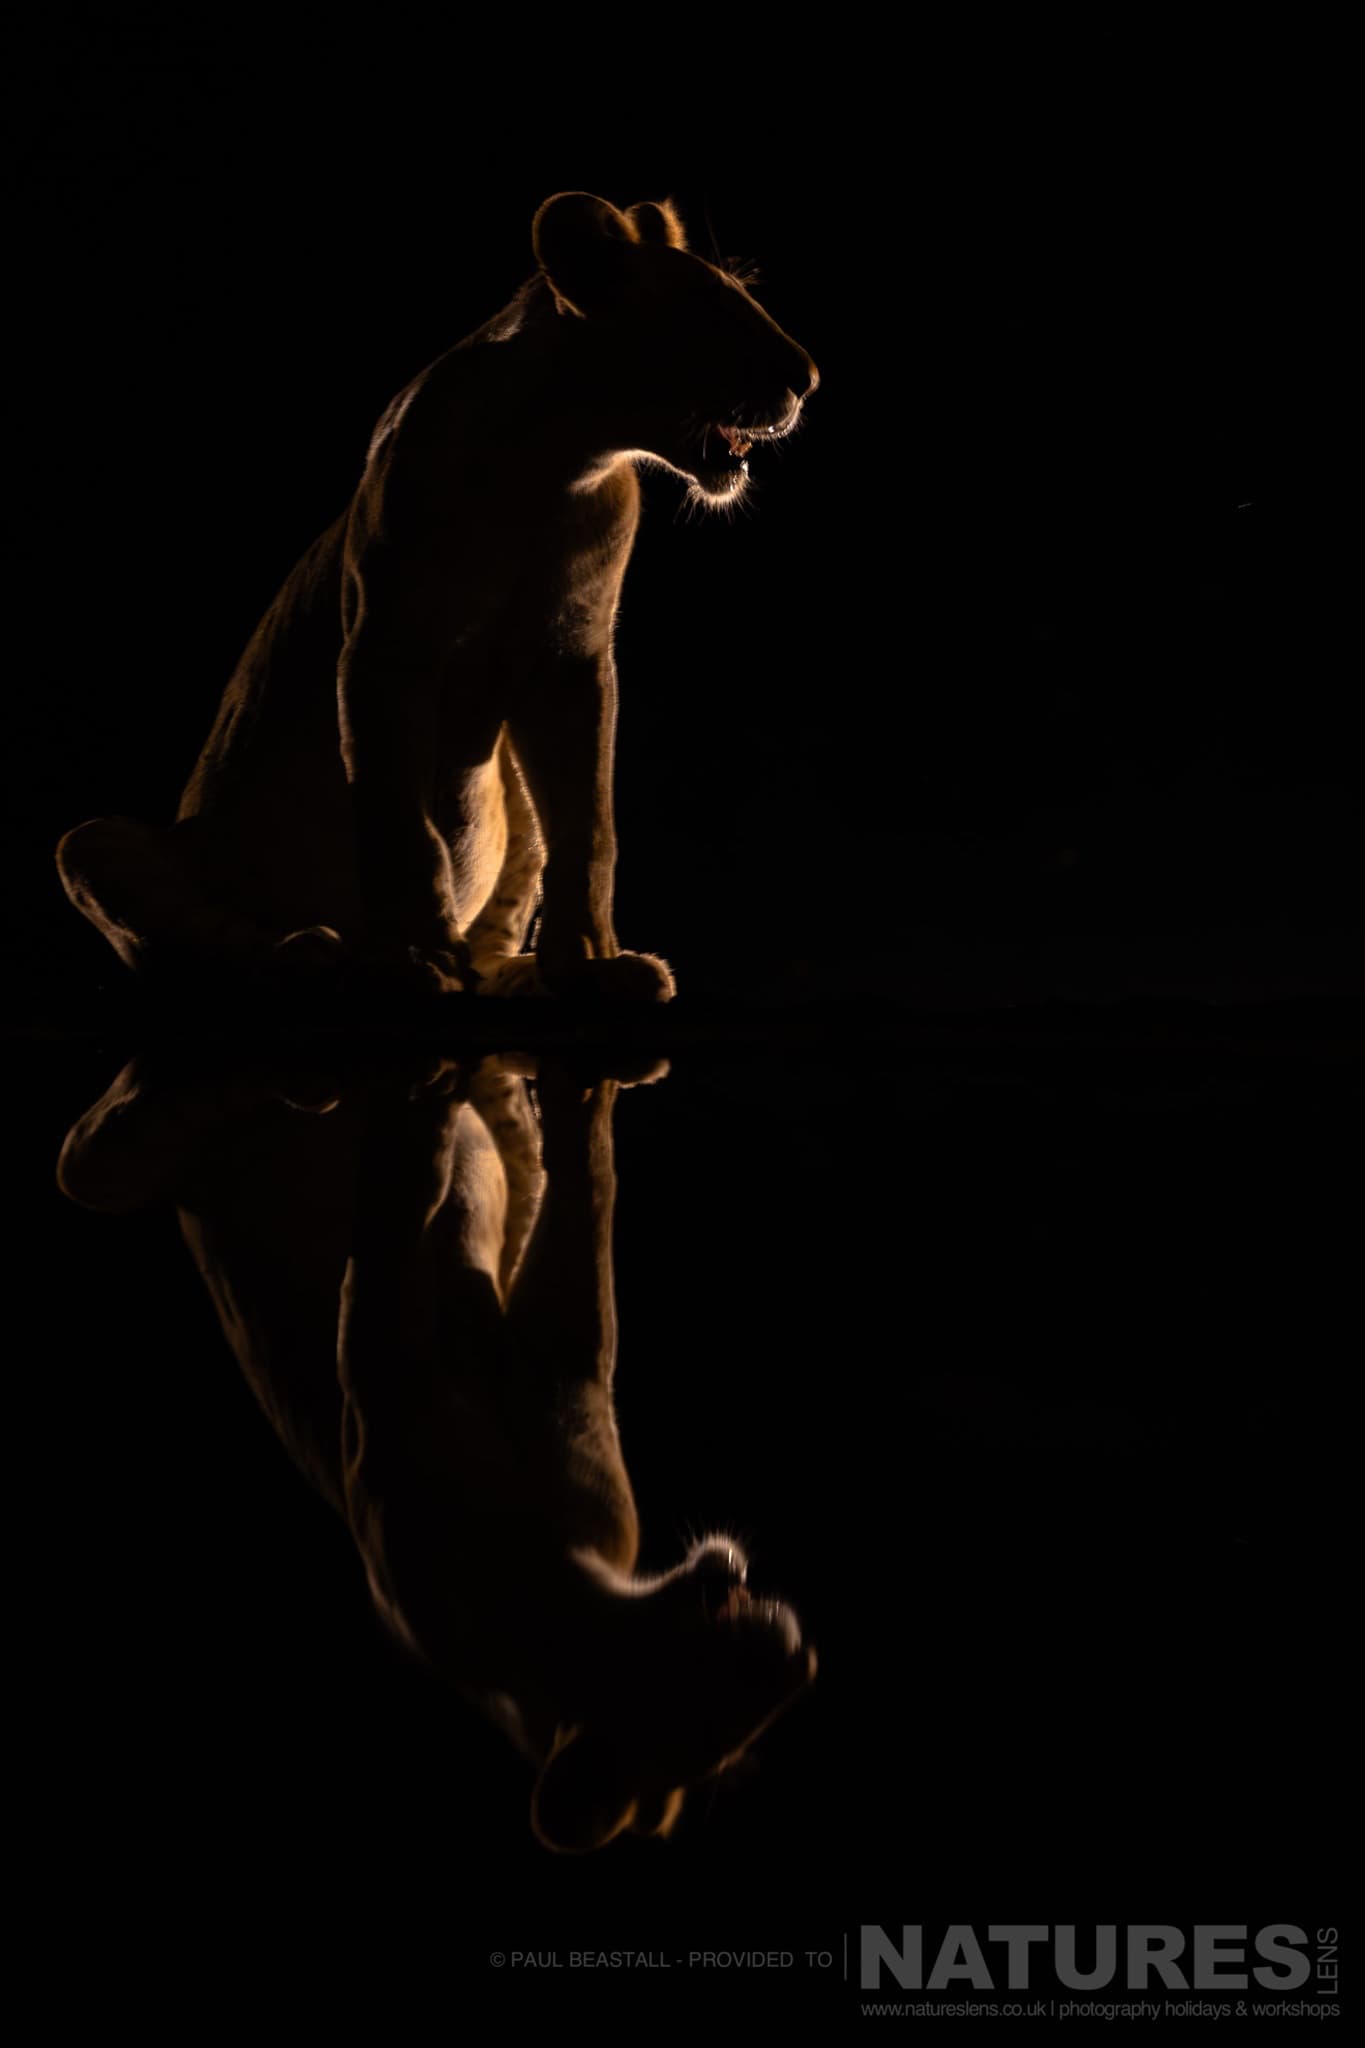 A Backlit Lion Cub Sat On The Edge Of The Waterhole At Night Photographed By Paul Beastall During A Photography Holiday In The Southern Great Rift Valley With Natureslens